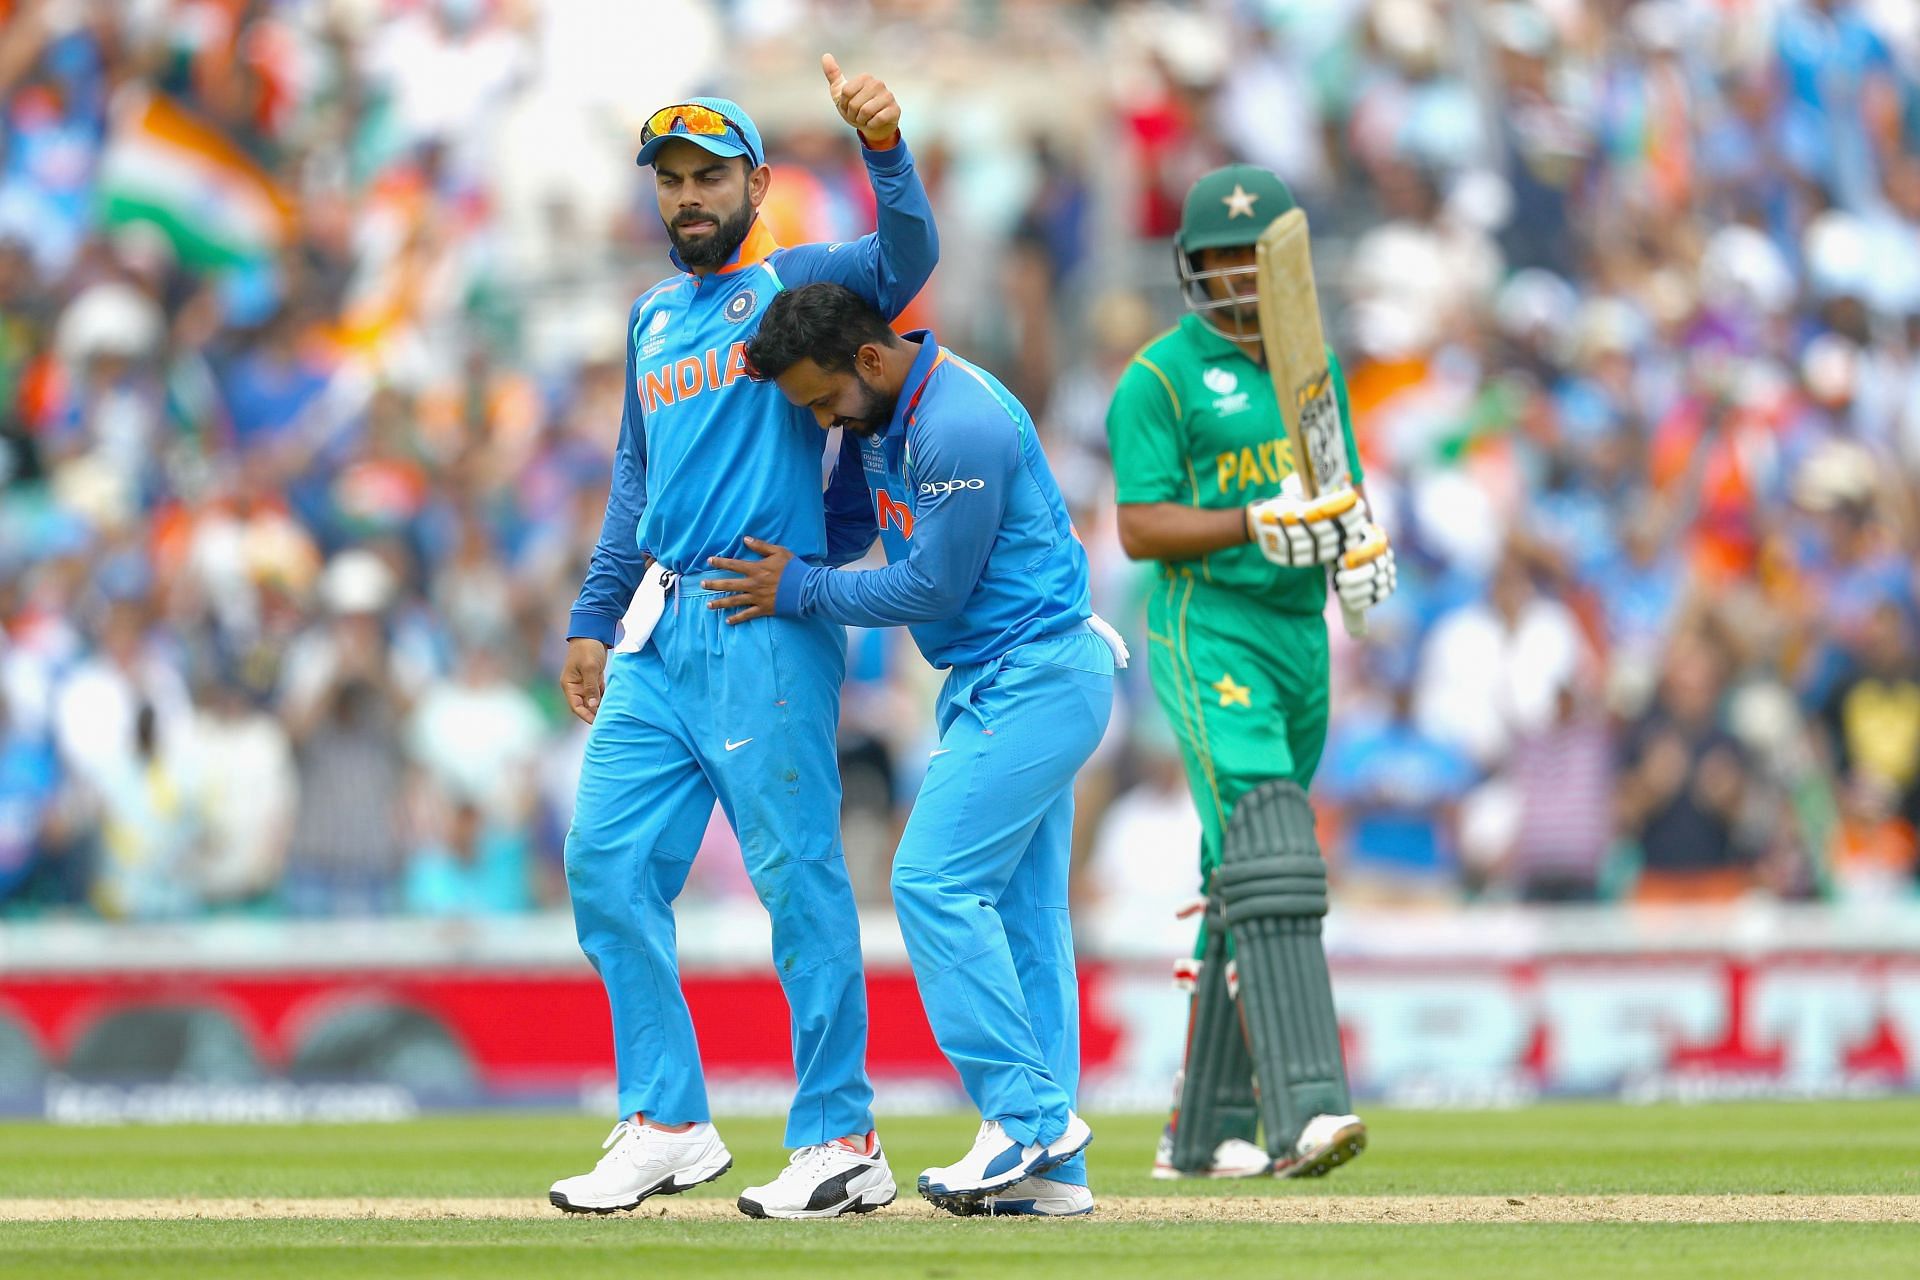 T20 World Cup 2021: India vs Pakistan predicted playing XIs